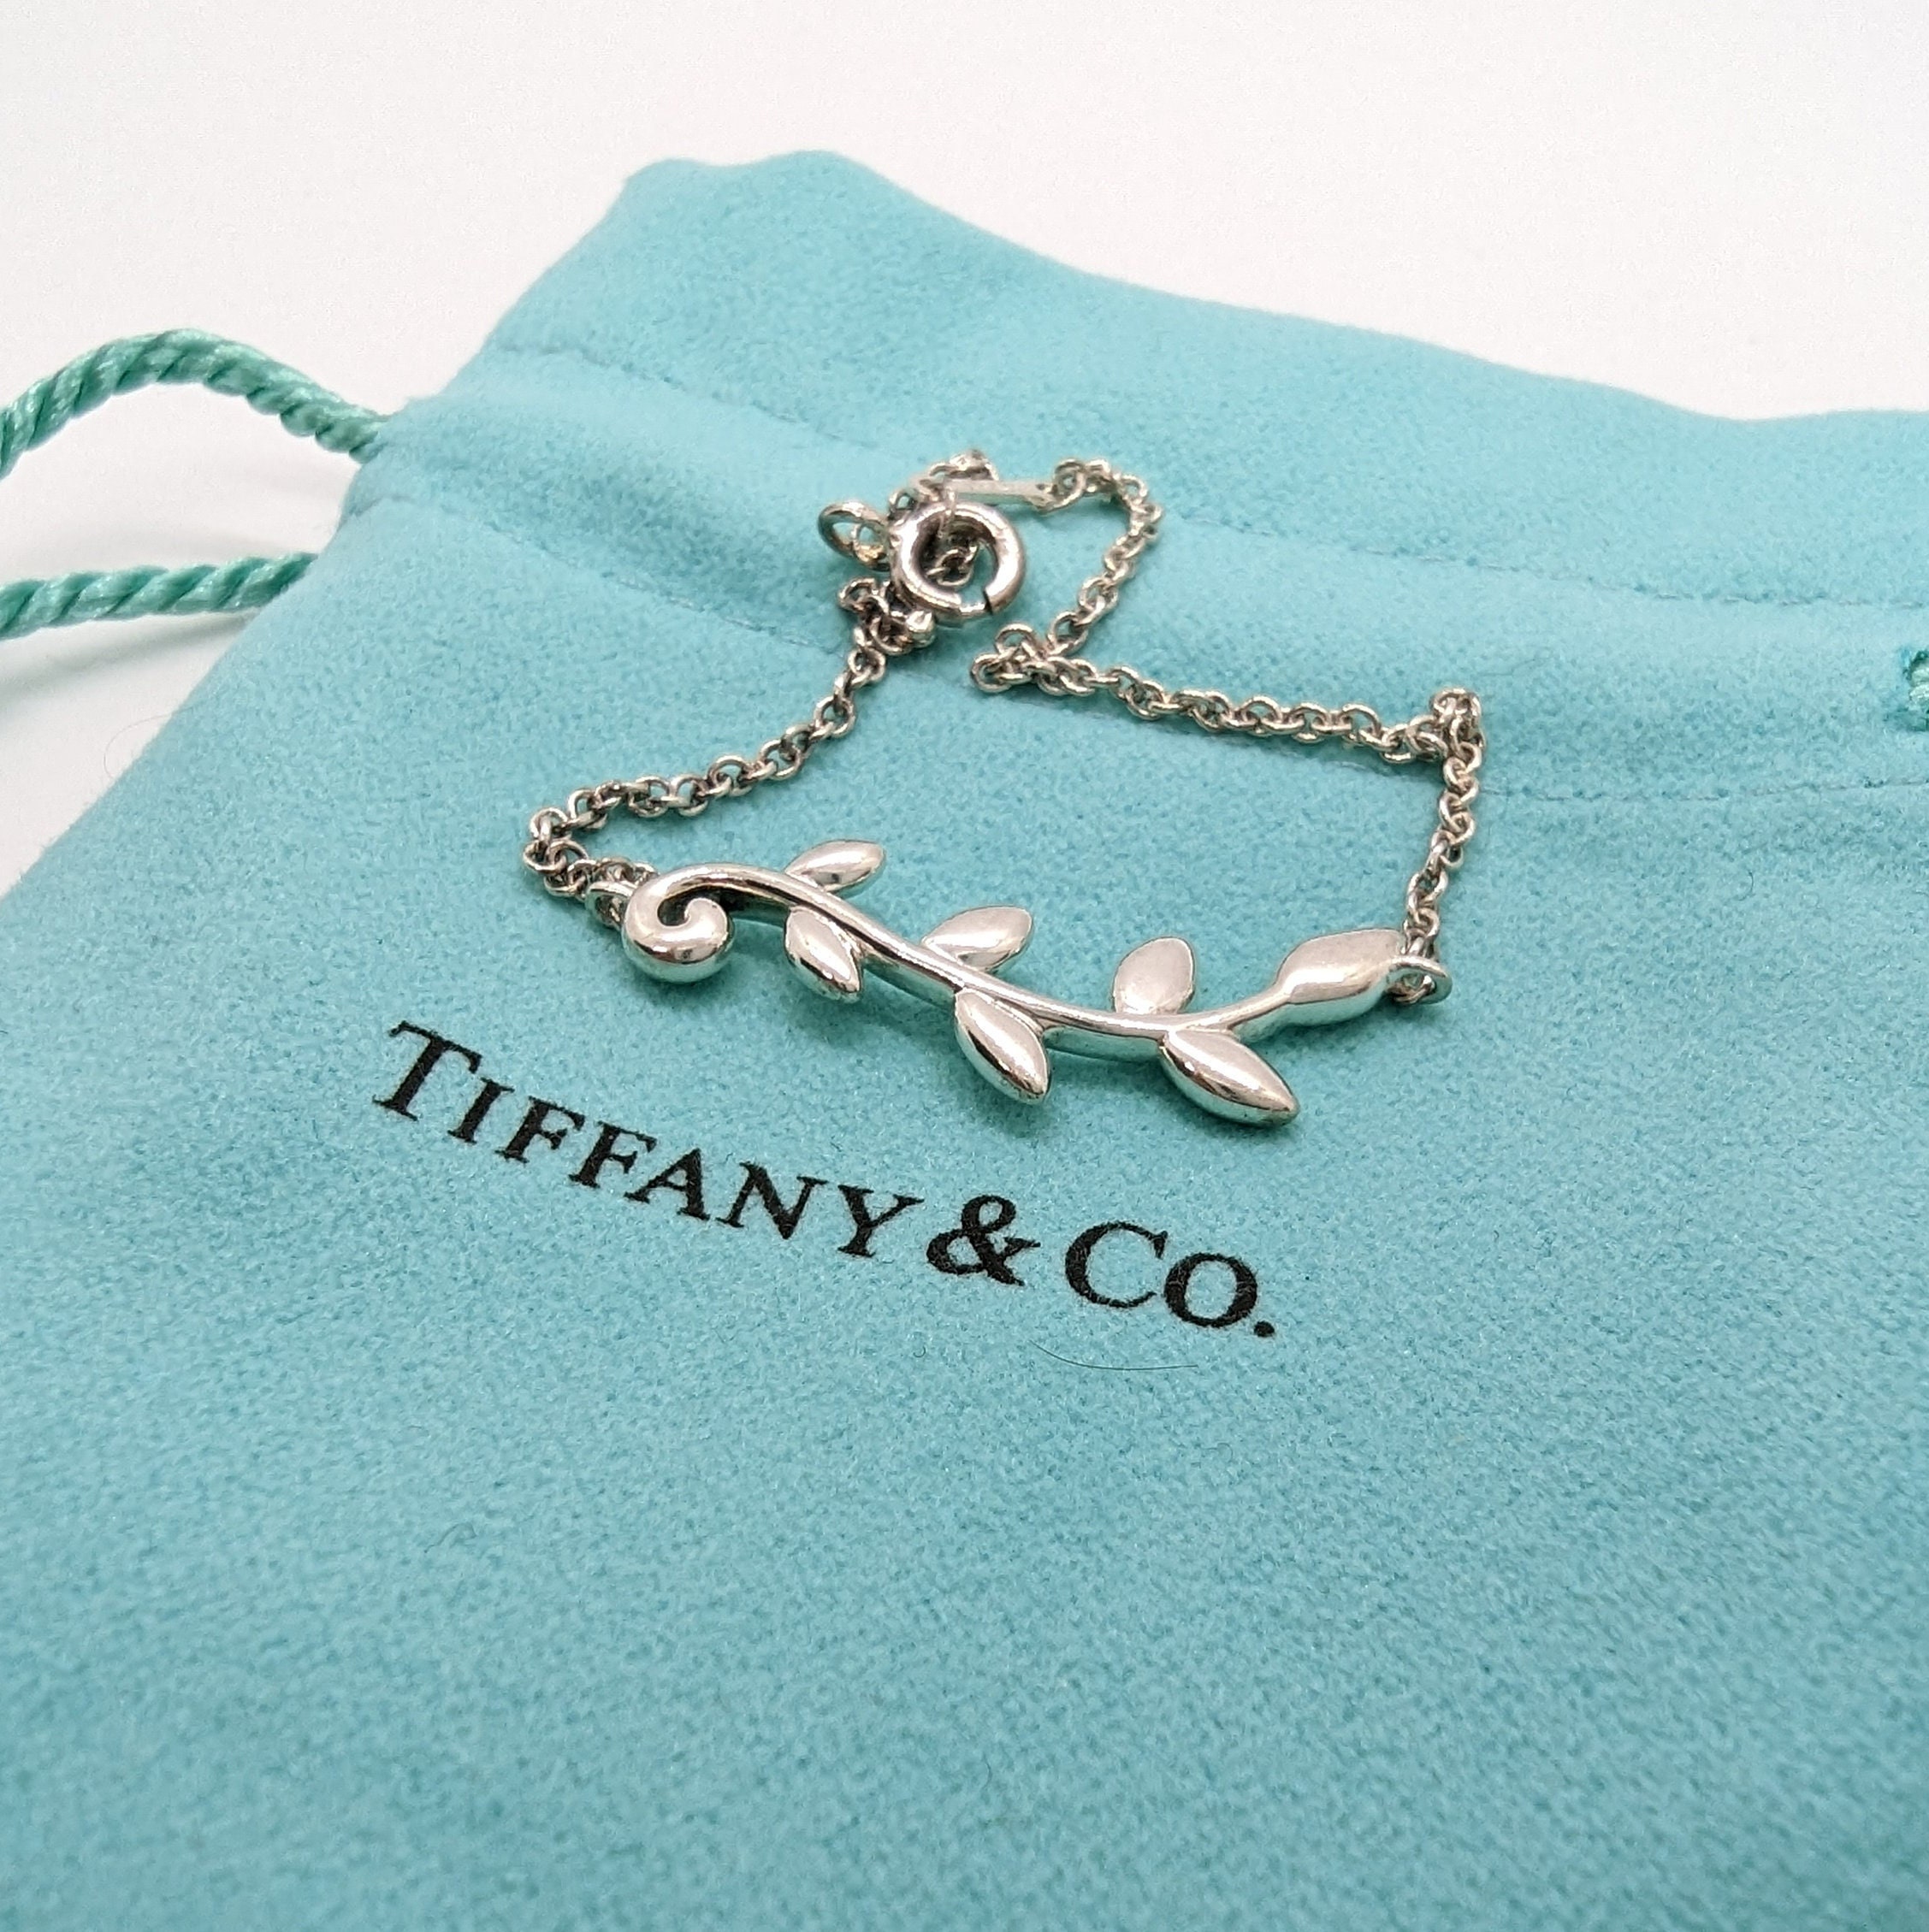 Tiffany & Co Paloma Picasso Olive Leaf Vine Bracelet Sterling Silver 925 |  Estate Jewelry | Dainty Necklace | Gift For Her | Ready To Ship